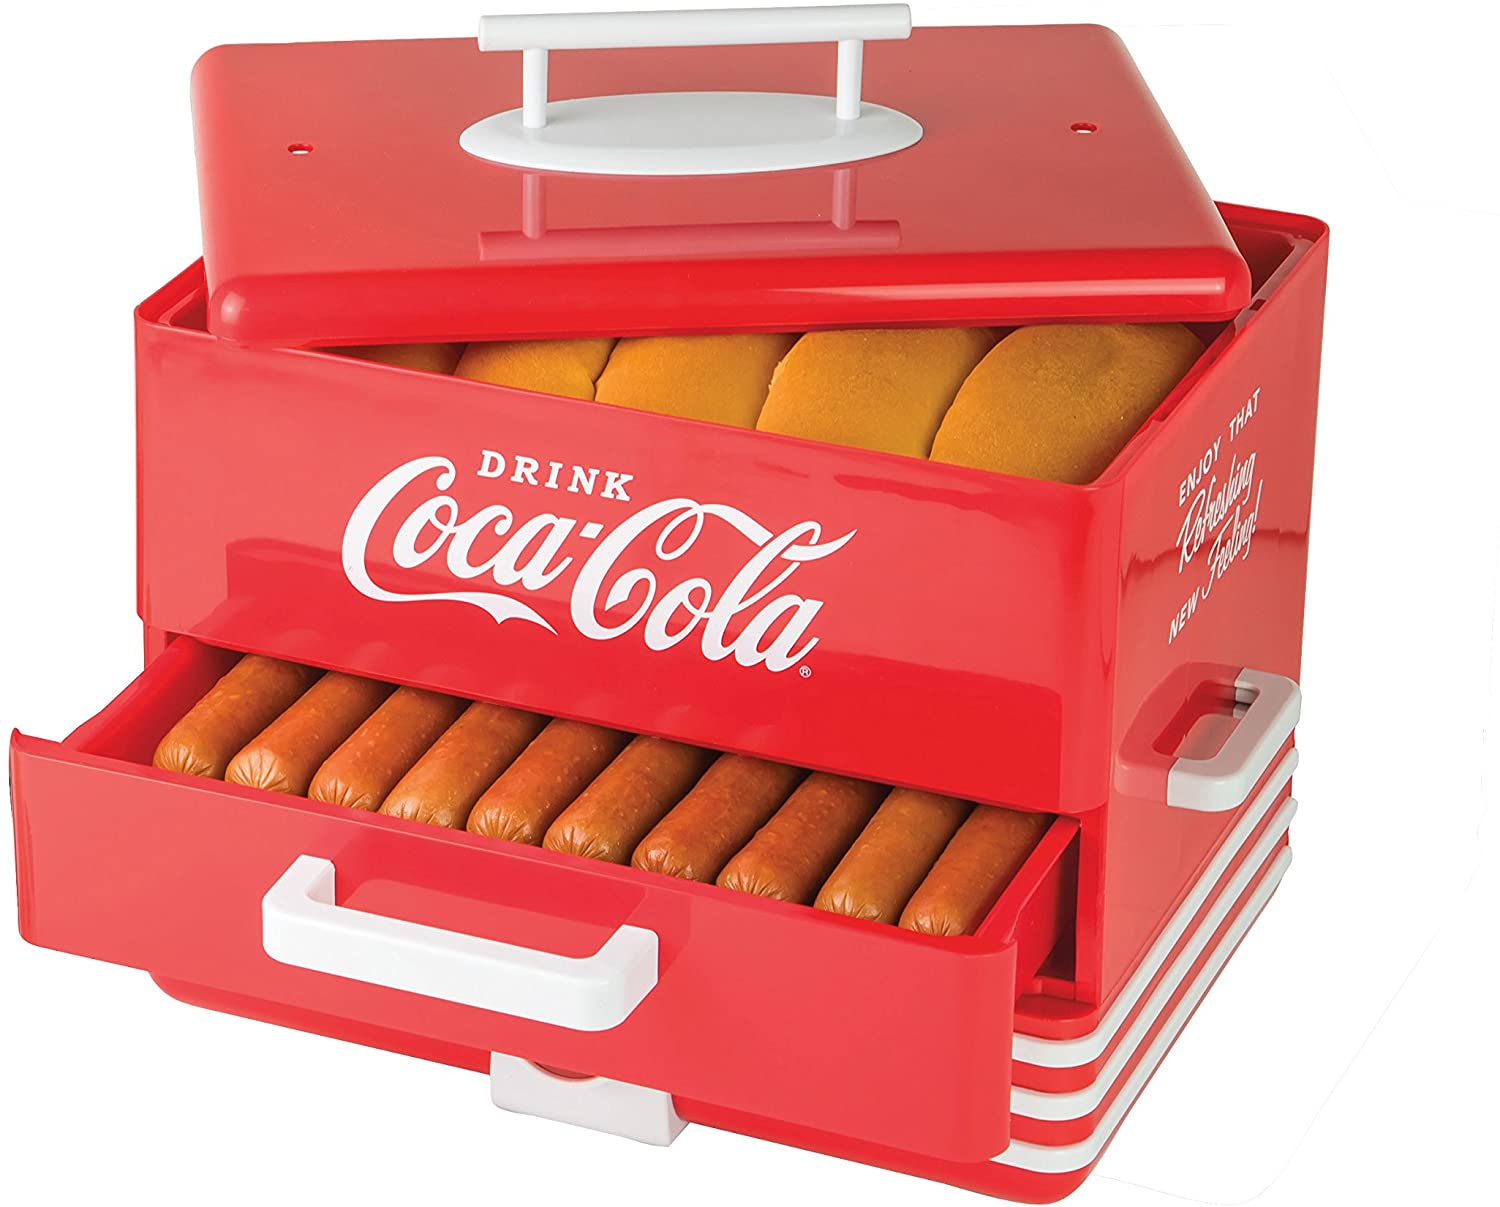 Nostalgia HDS248COKE Large Coca-Cola Diner-Style Hot Dog Steamer & Bun Warmer, 24 Hot Dogs and 12 Bun Capacity, Perfect For Breakfast Sausages, Brats, Vegetables, Fish, Red